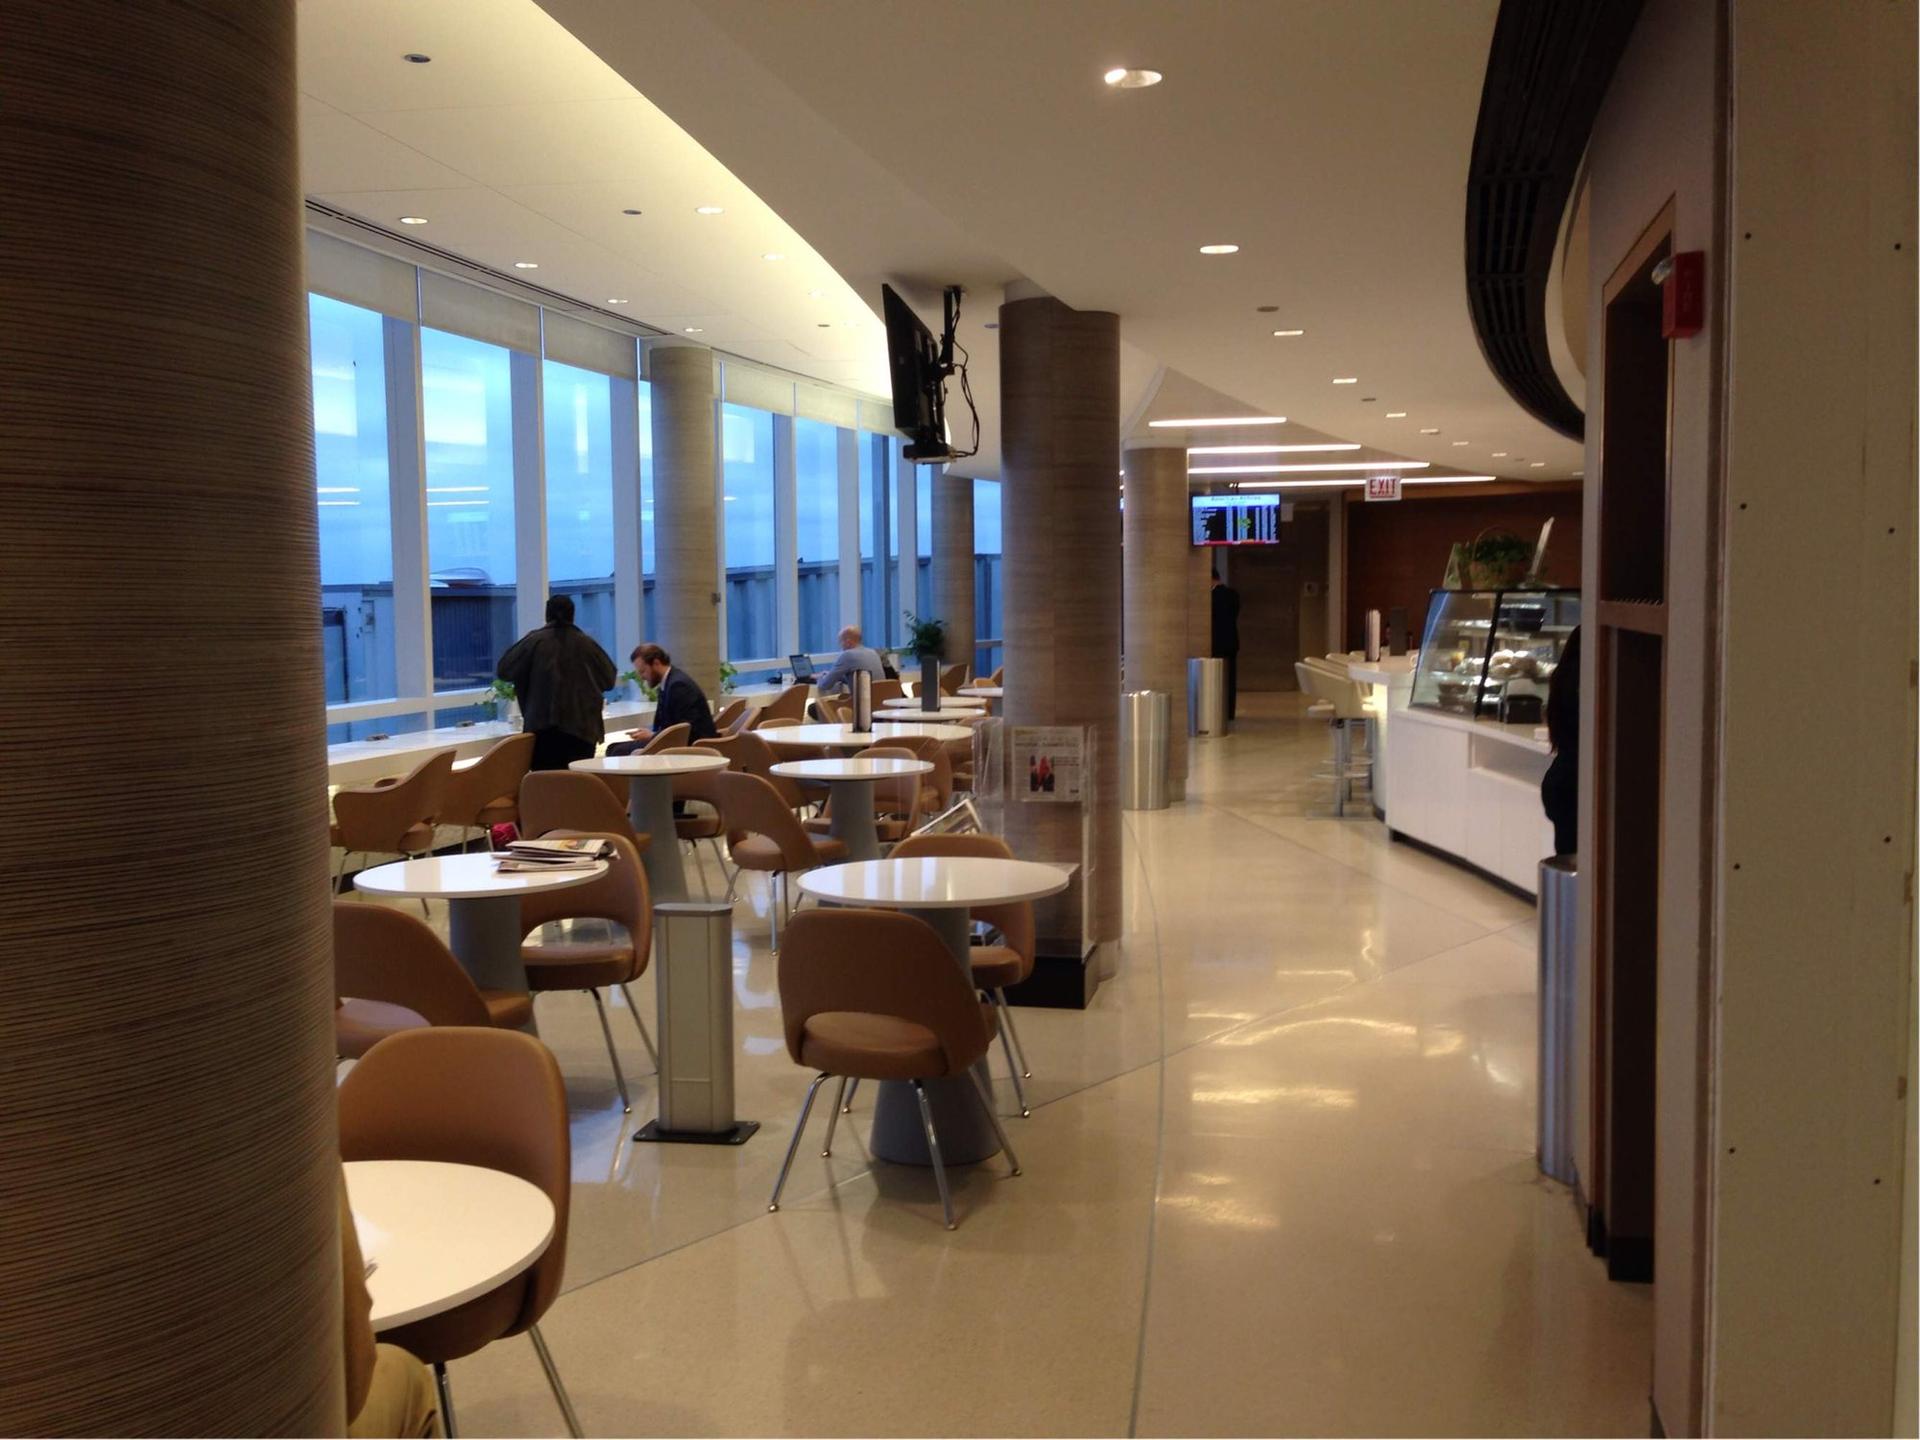 American Airlines Admirals Club image 9 of 50